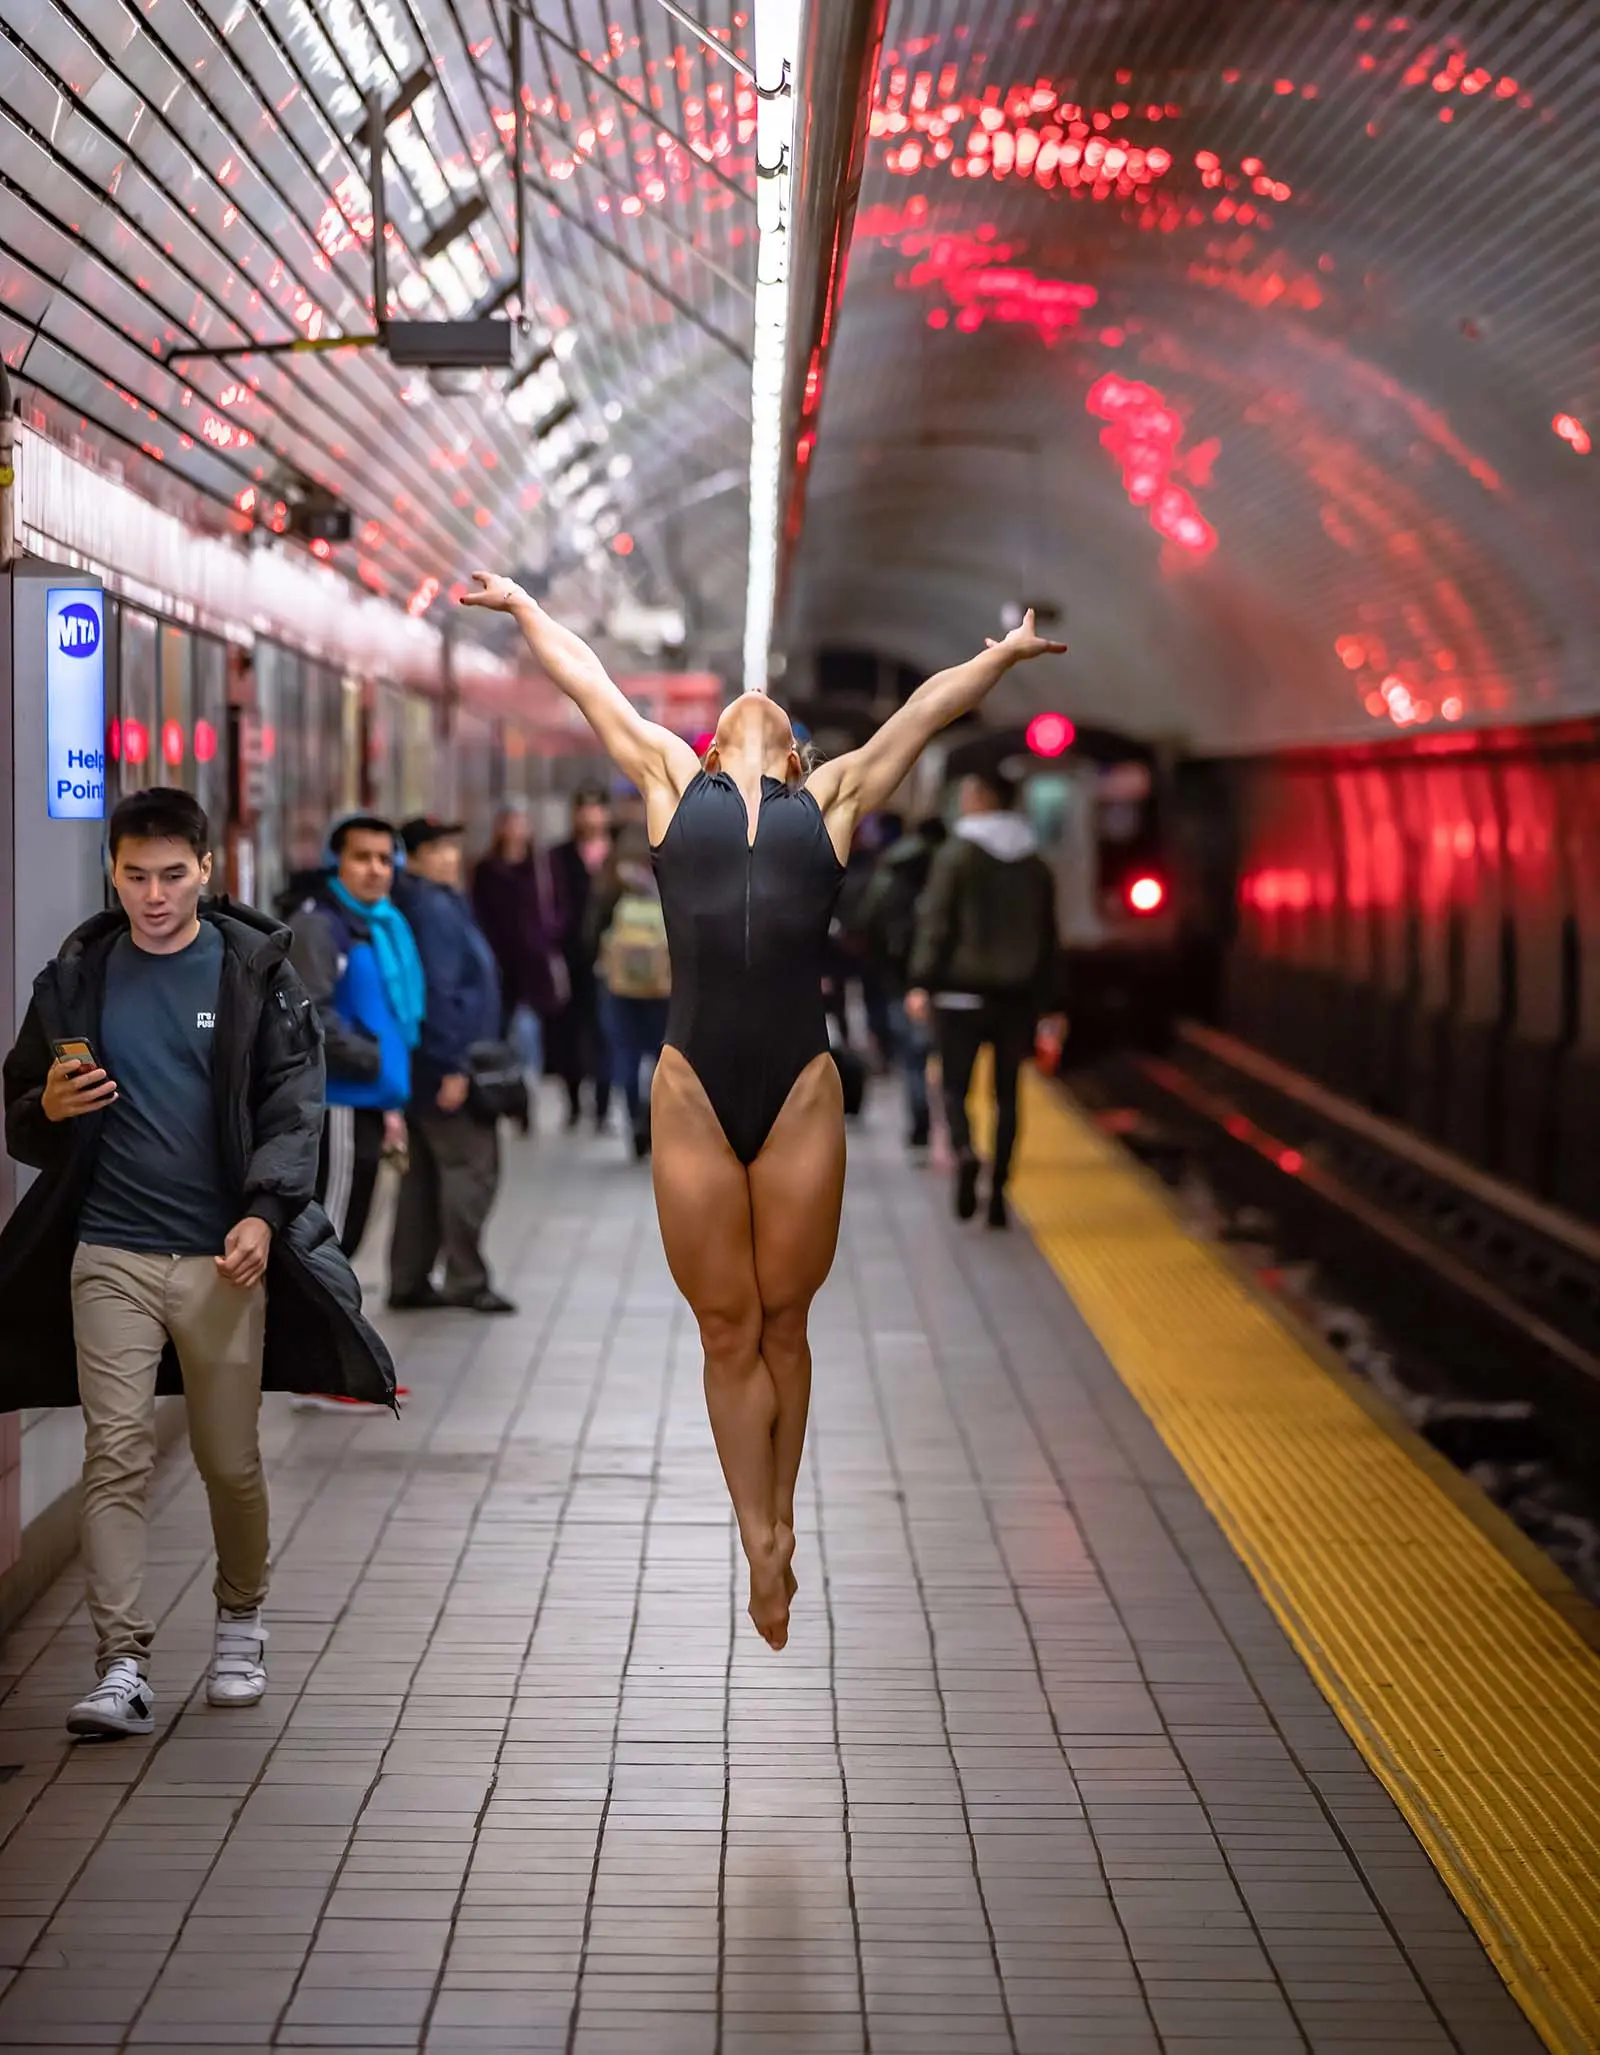 ballet dancer jumping in a subway station.